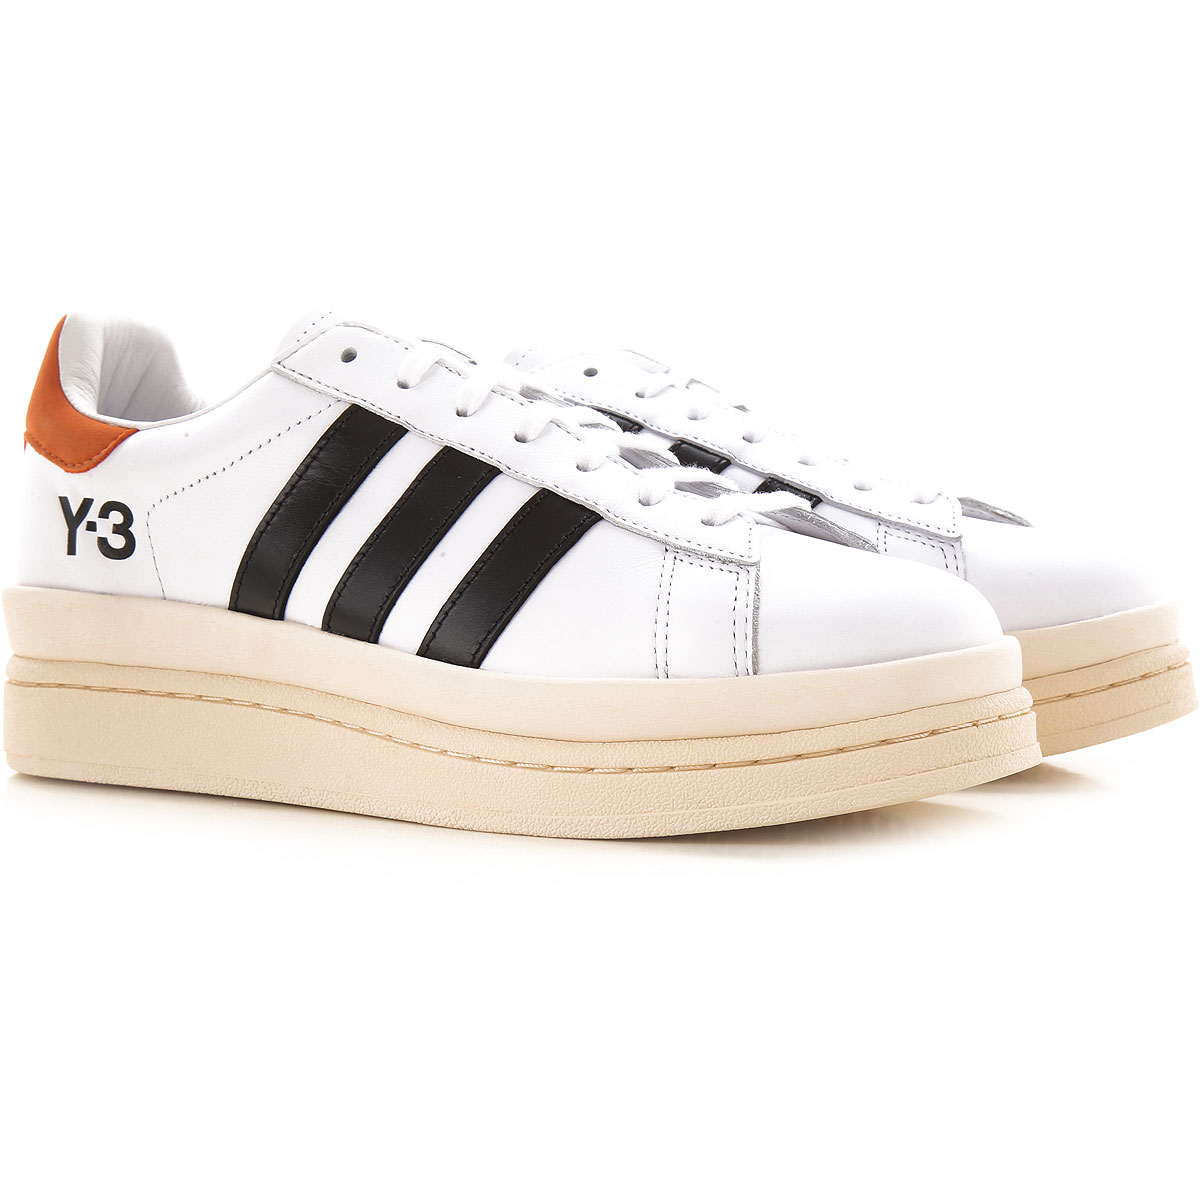 Mens Shoes Y3 by Yohji Yamamoto, Style code: fx1747-white-